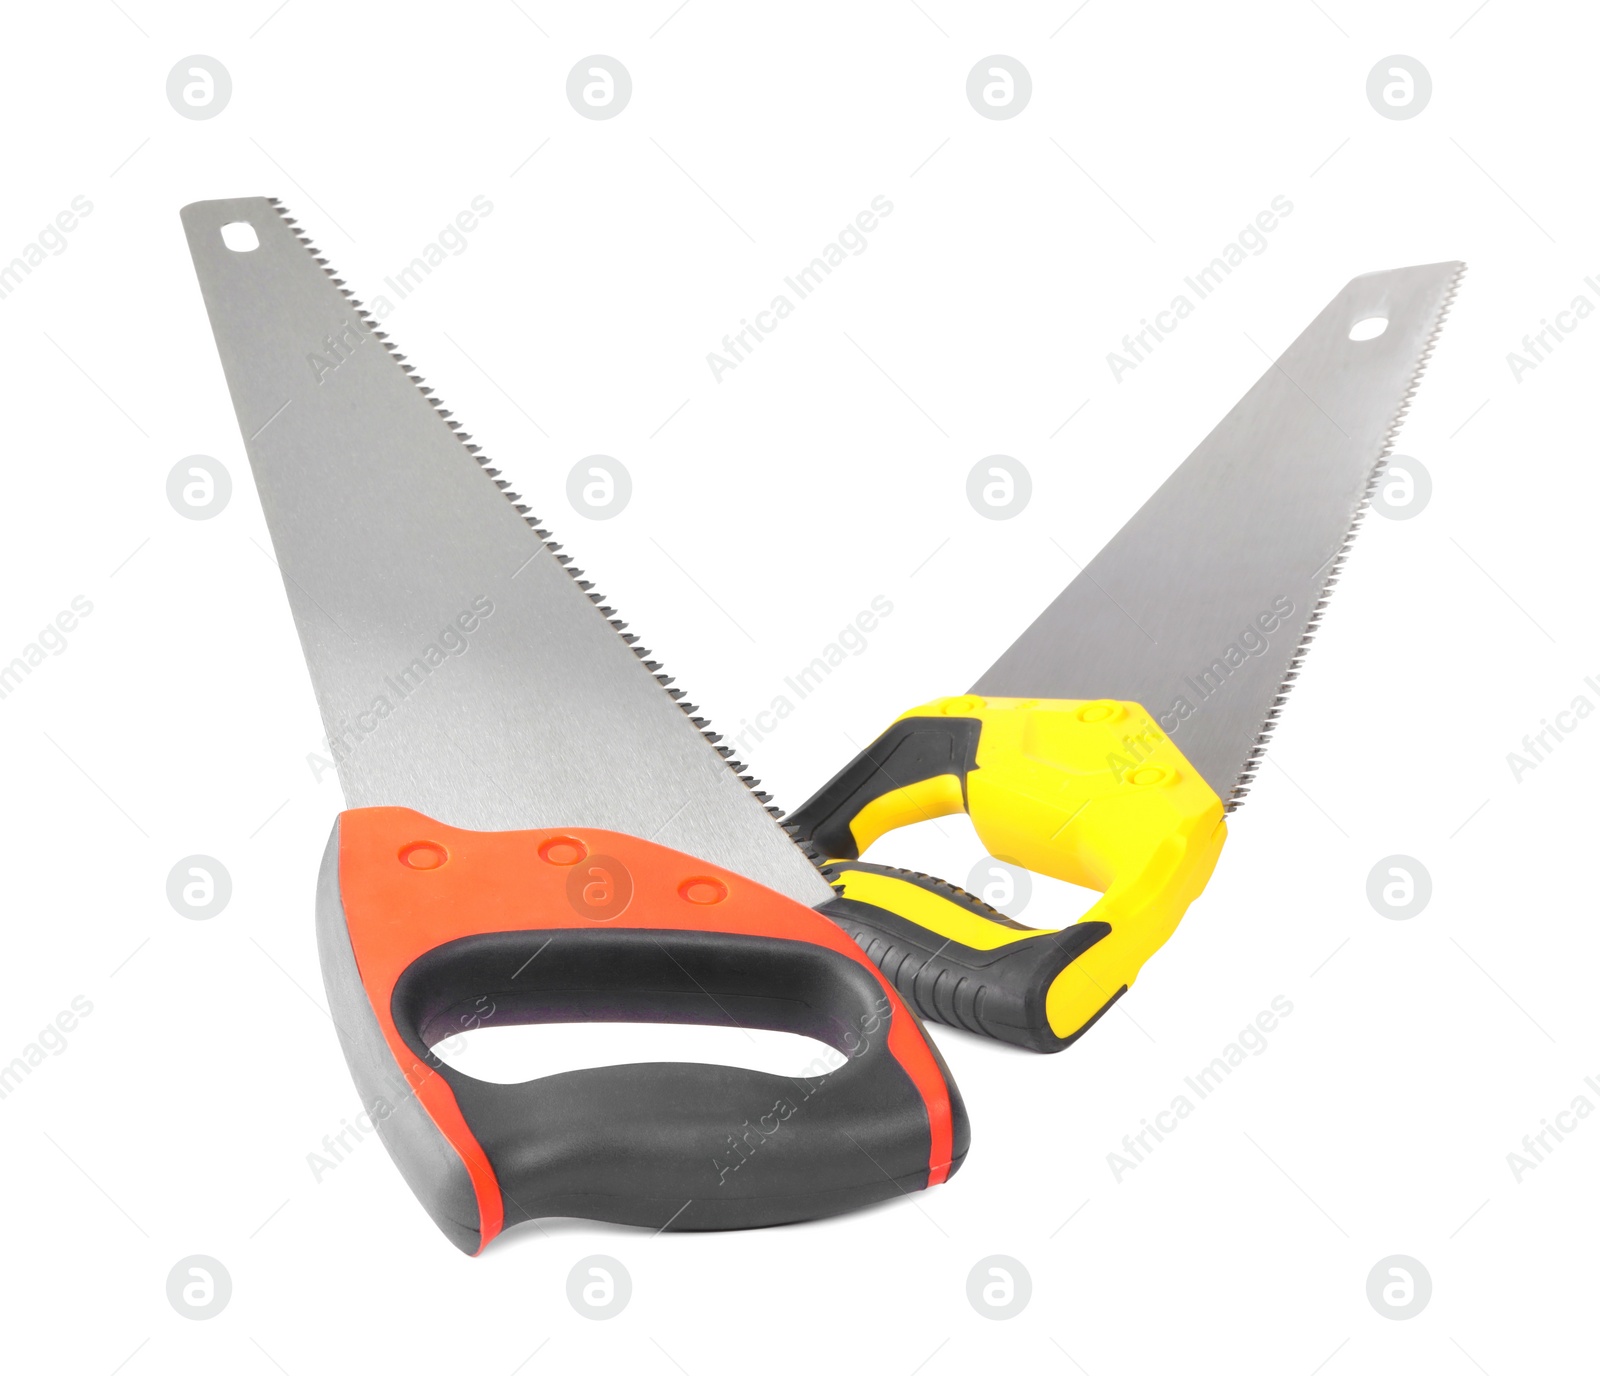 Photo of Saws with colorful handles isolated on white